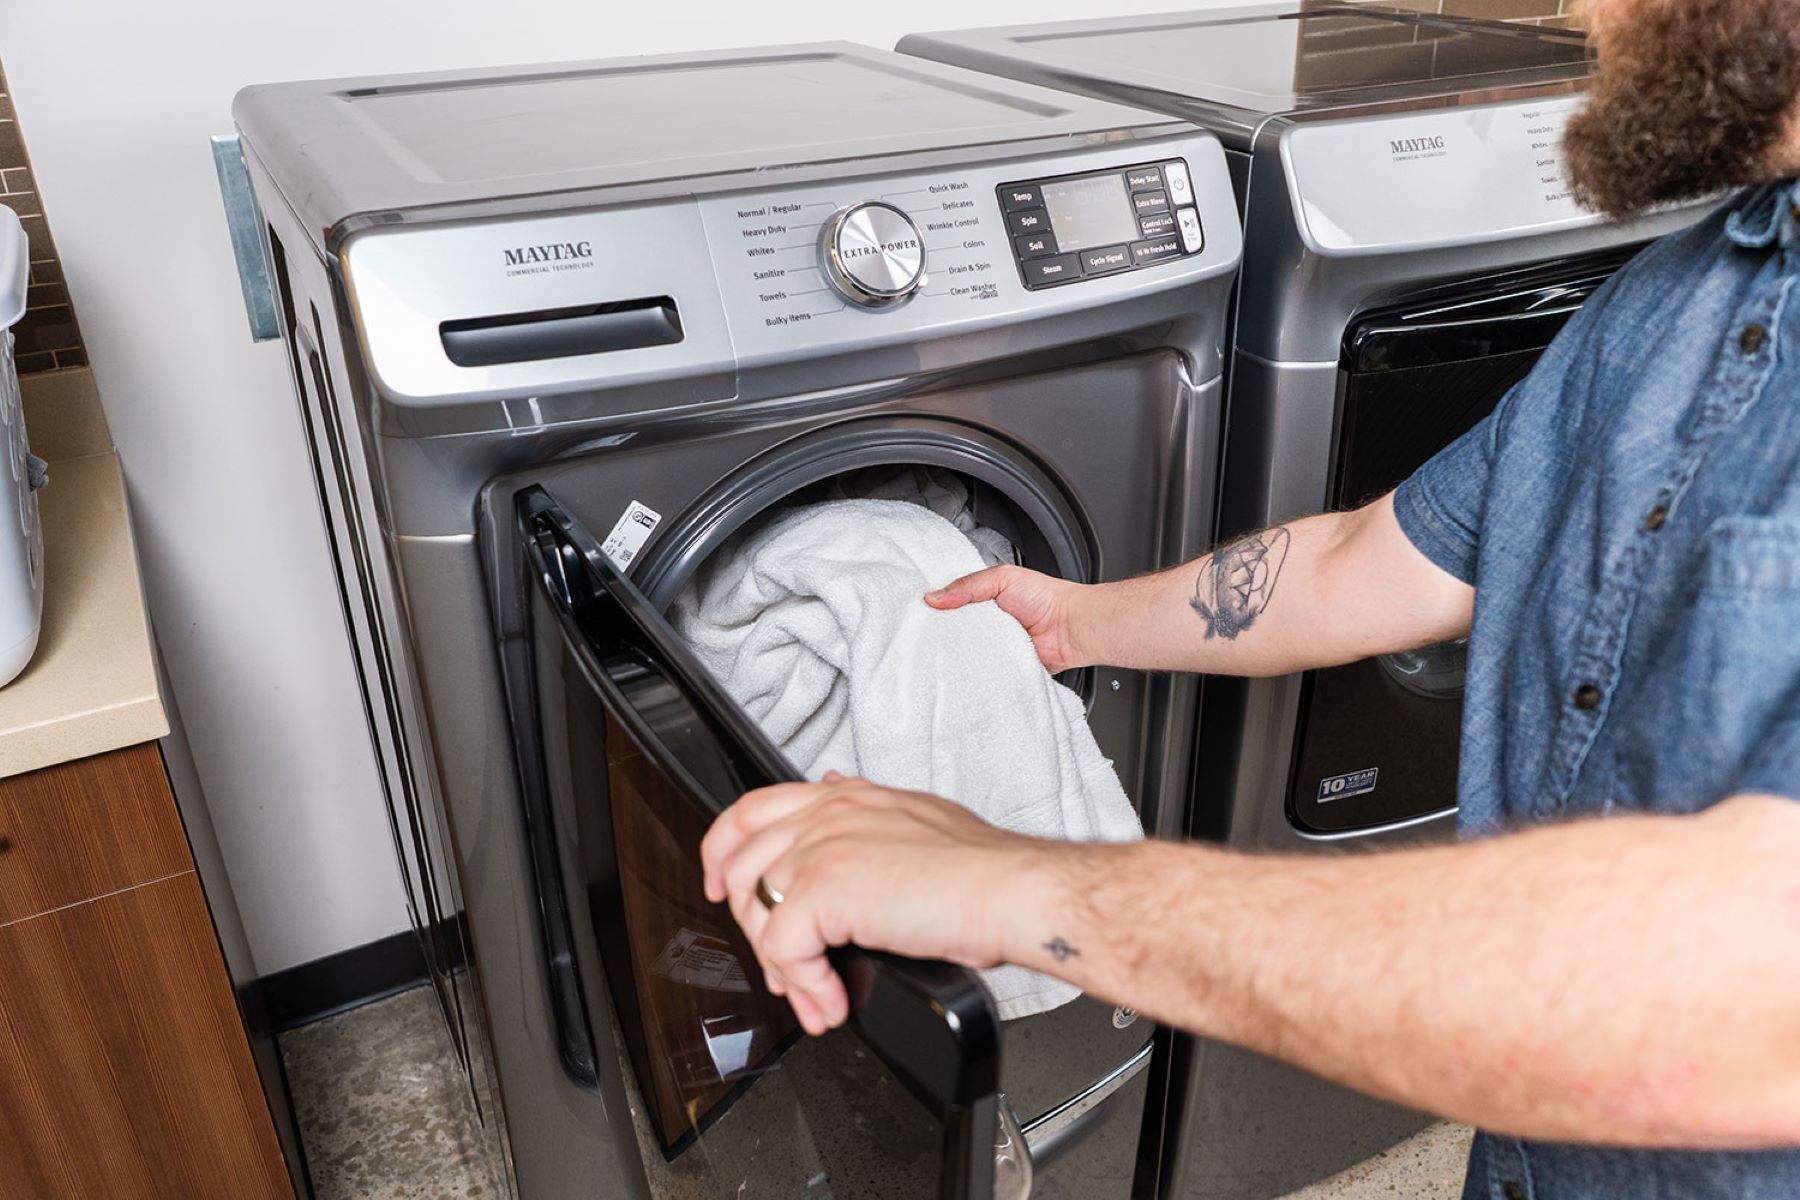 How To Use A Maytag Washing Machine